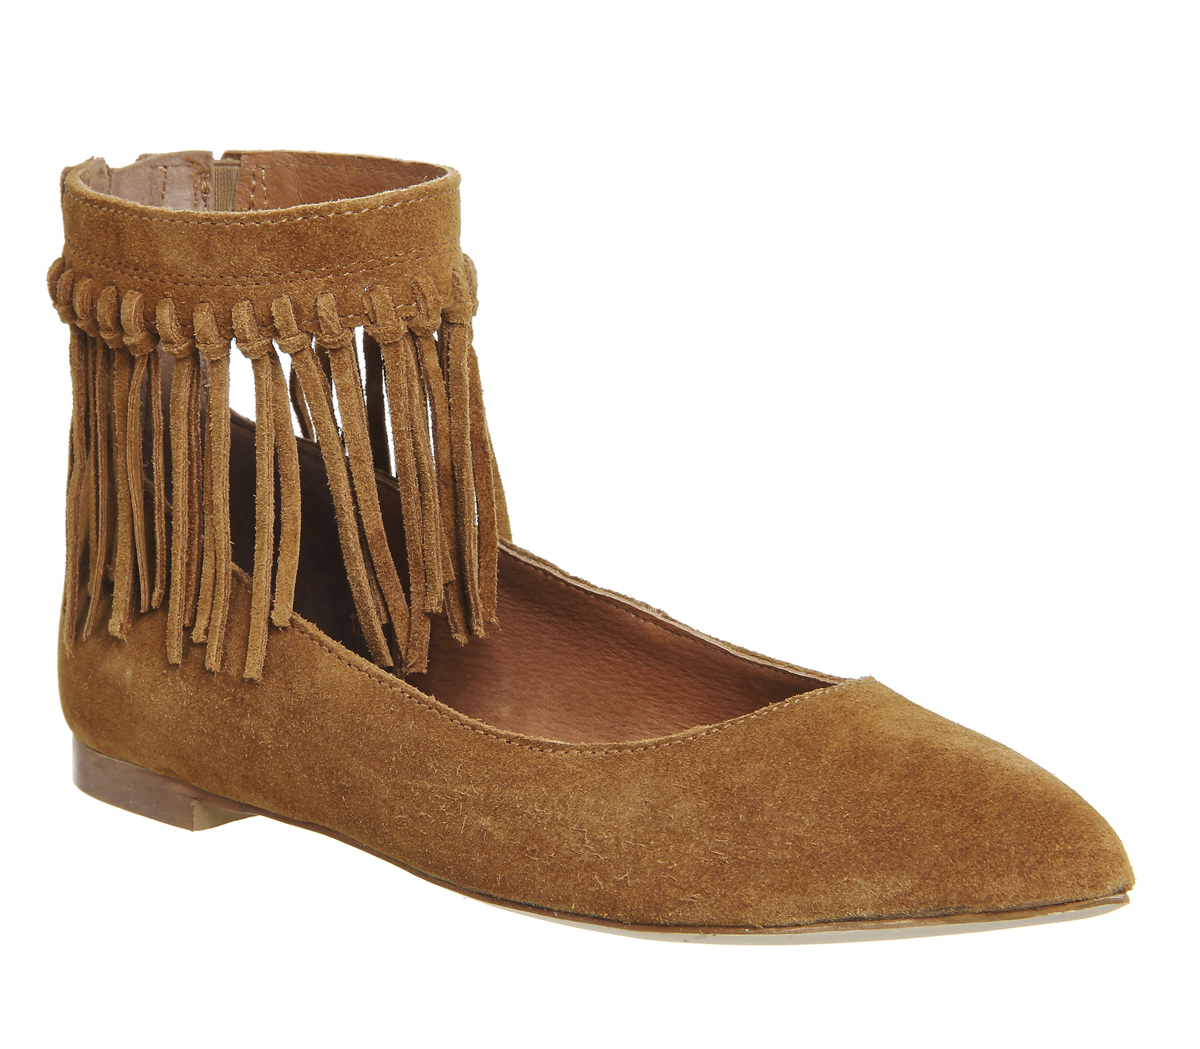 Office Deception Fringe Ankle Cuff Flats Tan Suede - Flats